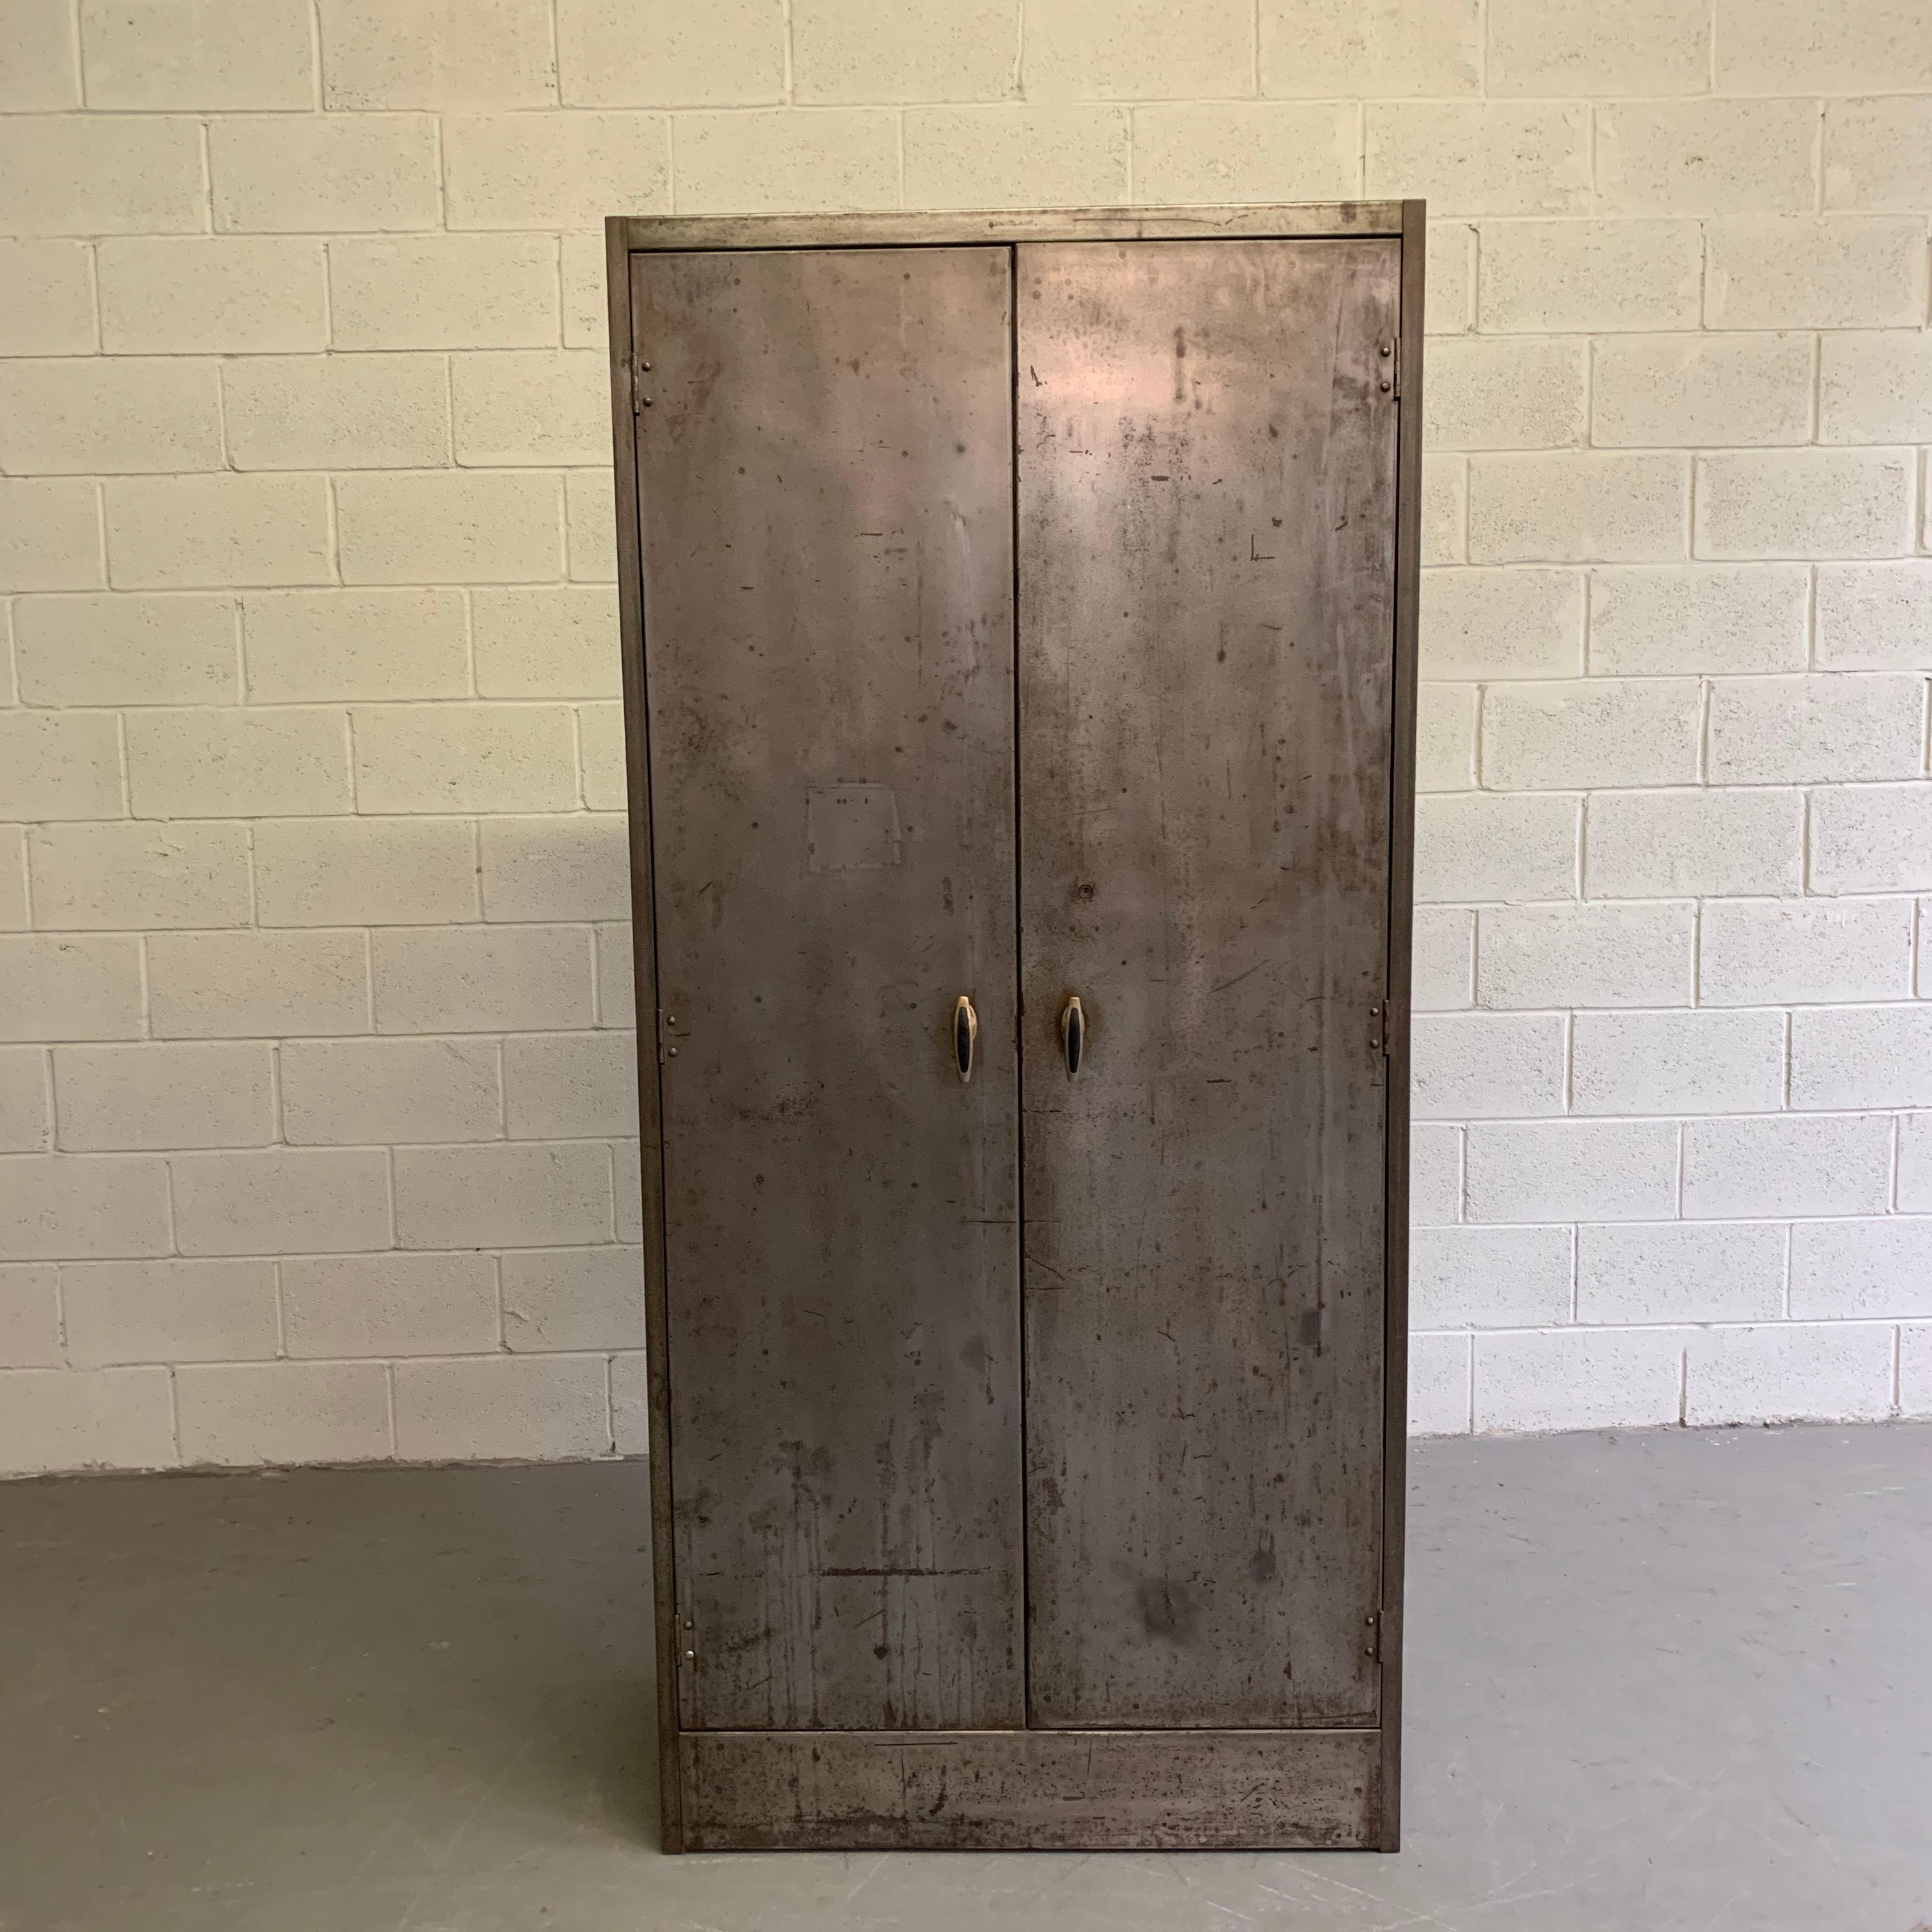 Tall, industrial, brushed steel, double door cabinet can be used as an armoire or wardrobe. The interior retains its rustic original patina with adjustable shelves. Interior dimensions are 36 x 17.25 x 69.75.